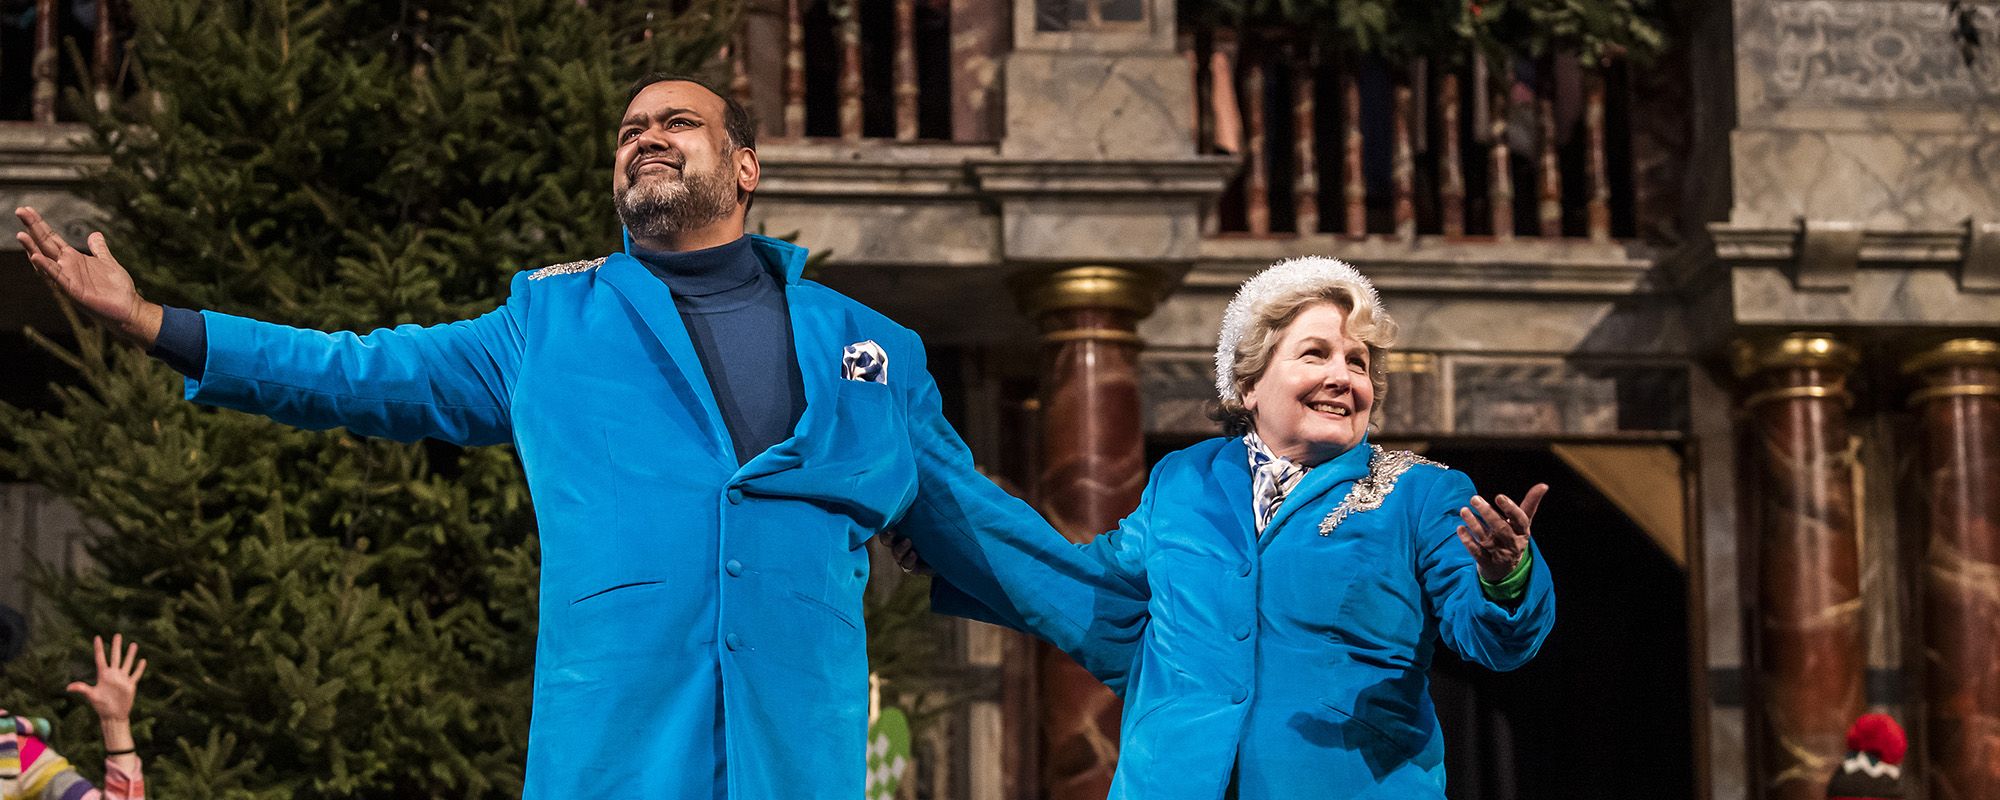 A male and female actor, wearing matching blue suits, stand onstage with their arms outstretched, smiling.